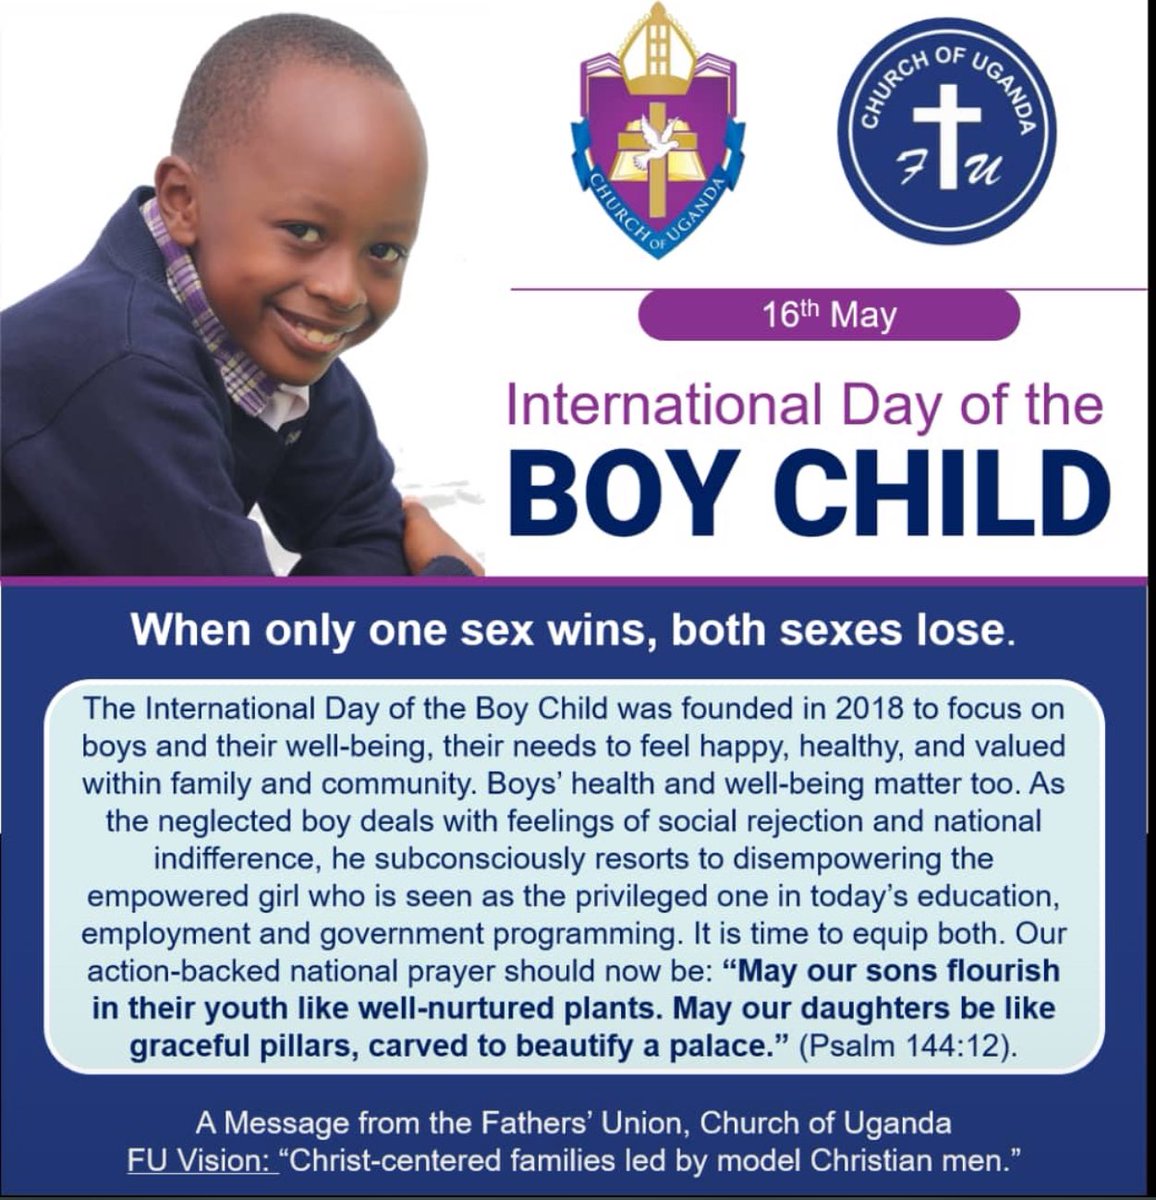 Still celebrating the International Day of #BoyChild, we want to extend our great thanks to @ChurchofUganda_ for fostering discussions around #EmpoweringBoys through it's leaders. It's true the boys' well-being in health, access to needs, social support and Education are....